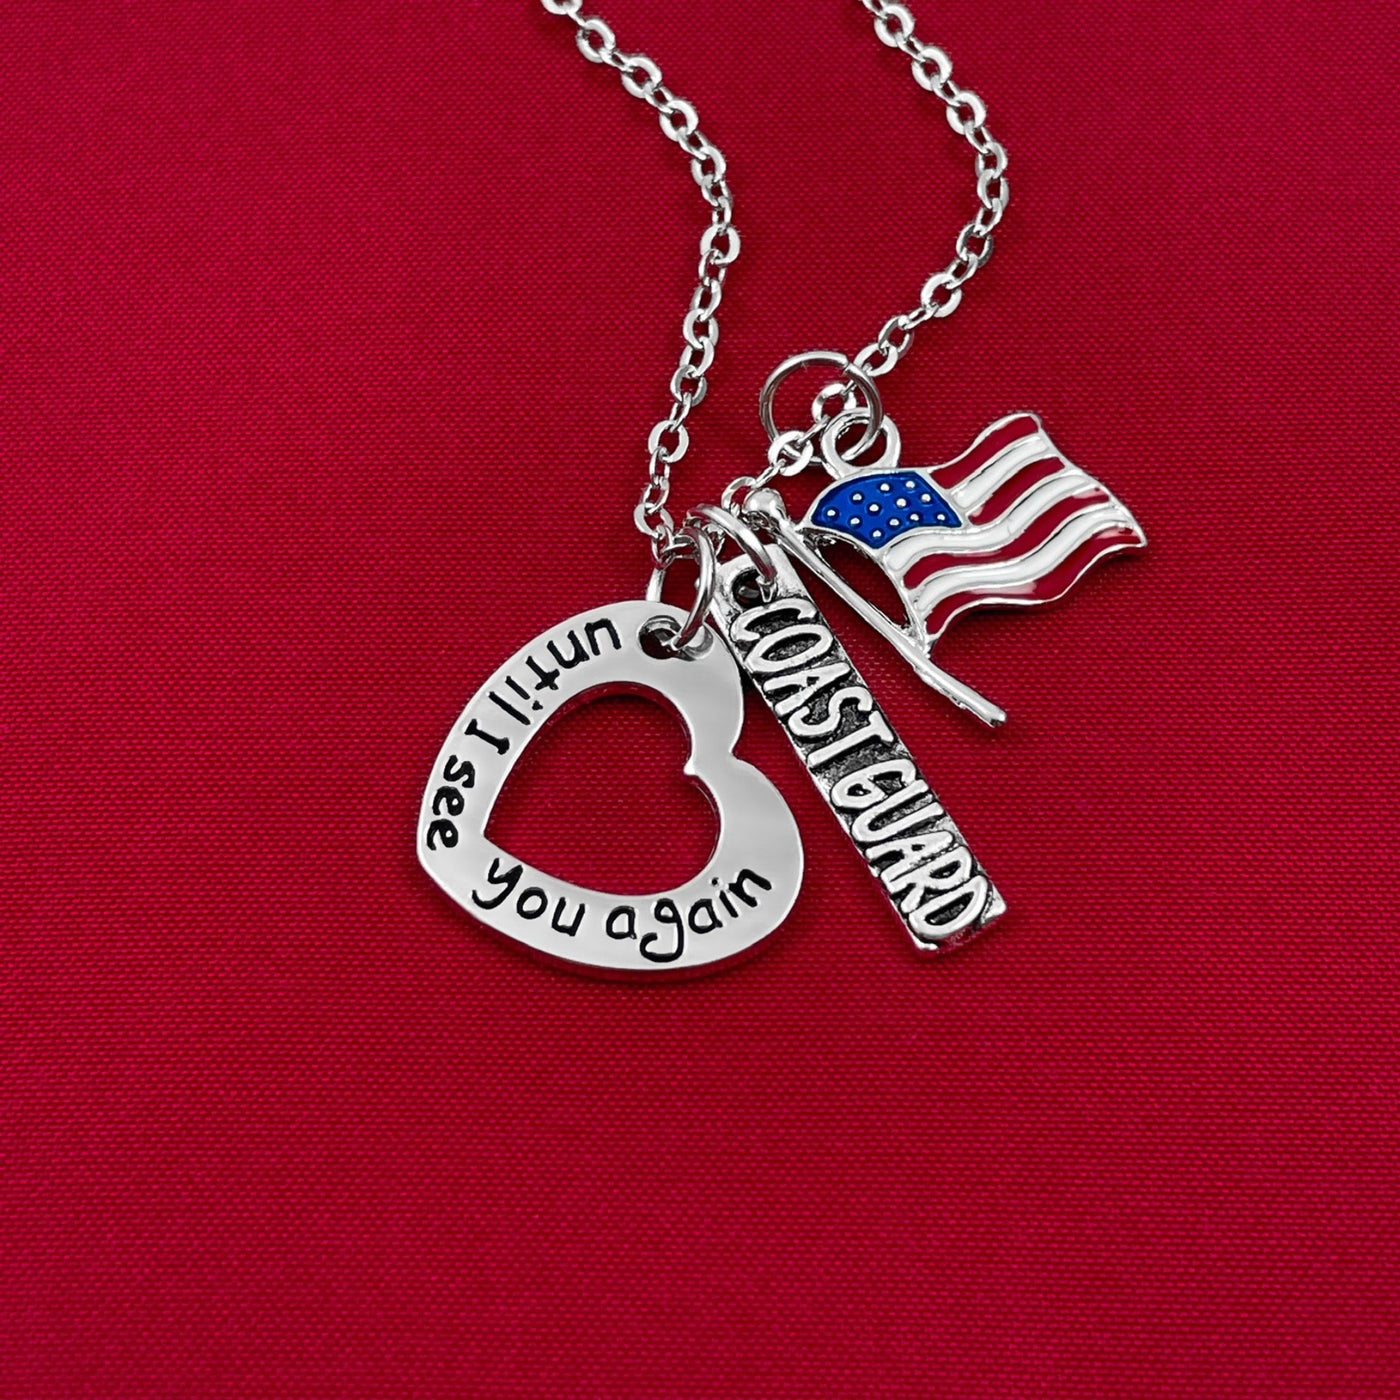 Until I See You Again Necklace - Coast Guard